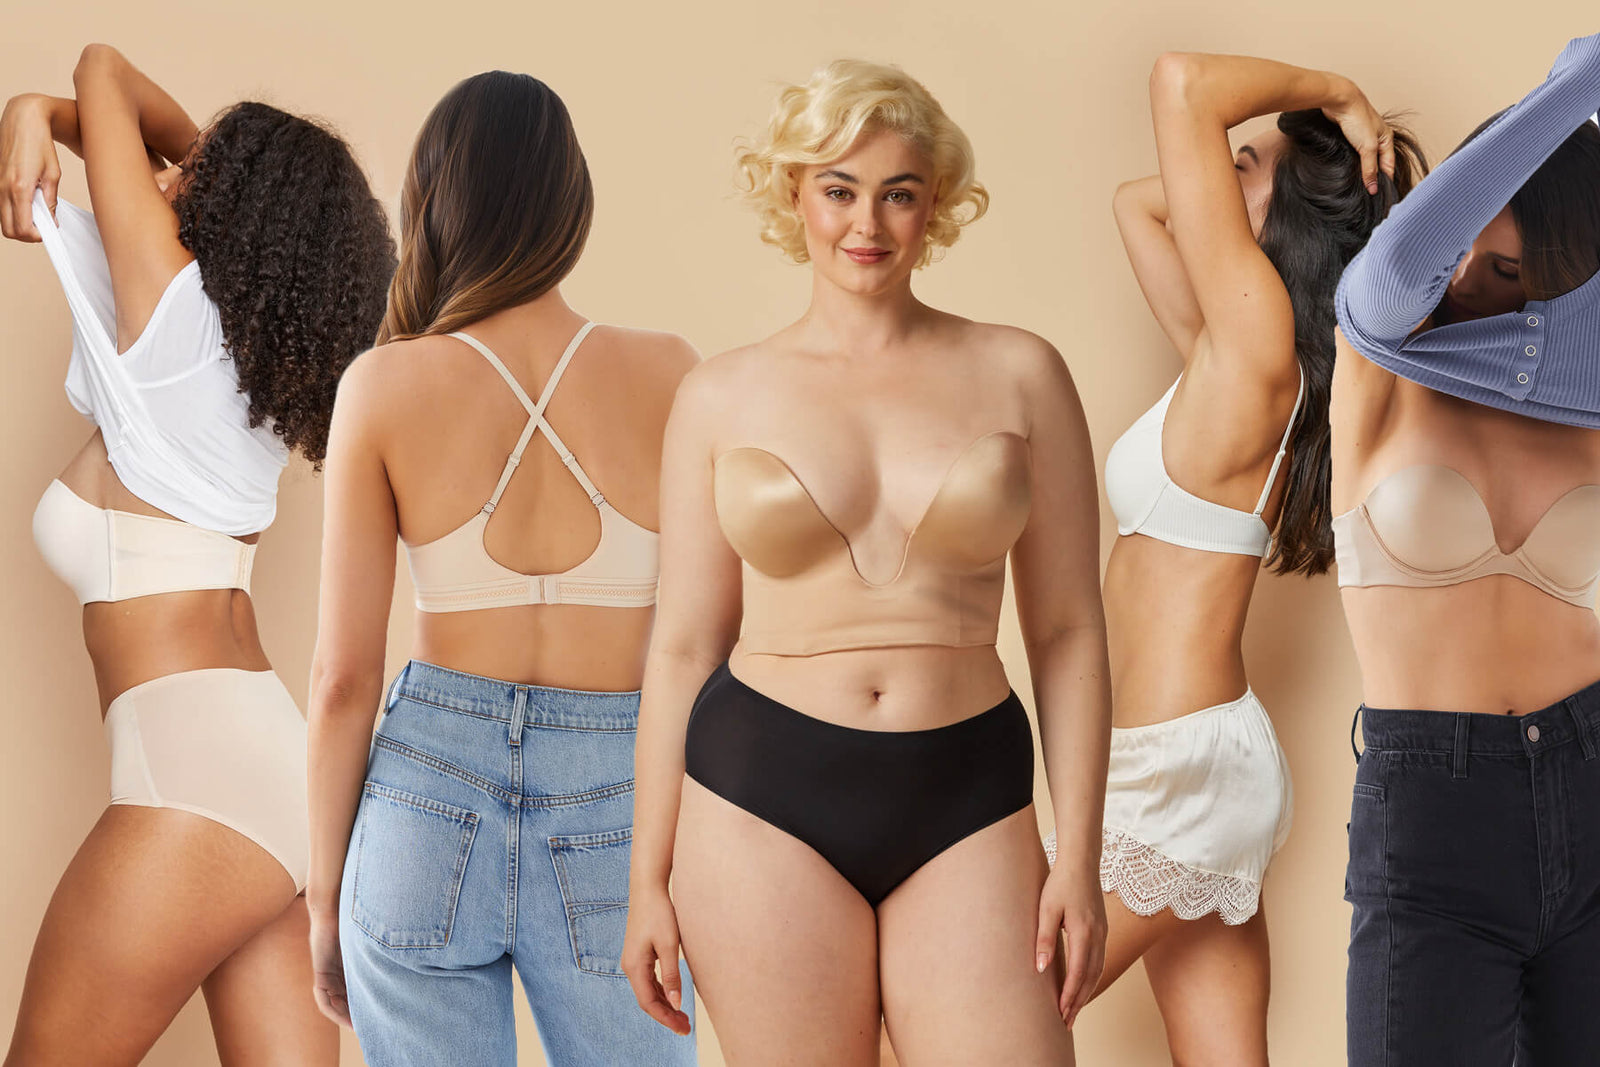 The 5 Must-Have Bras You Need - Fine Lines Lingerie